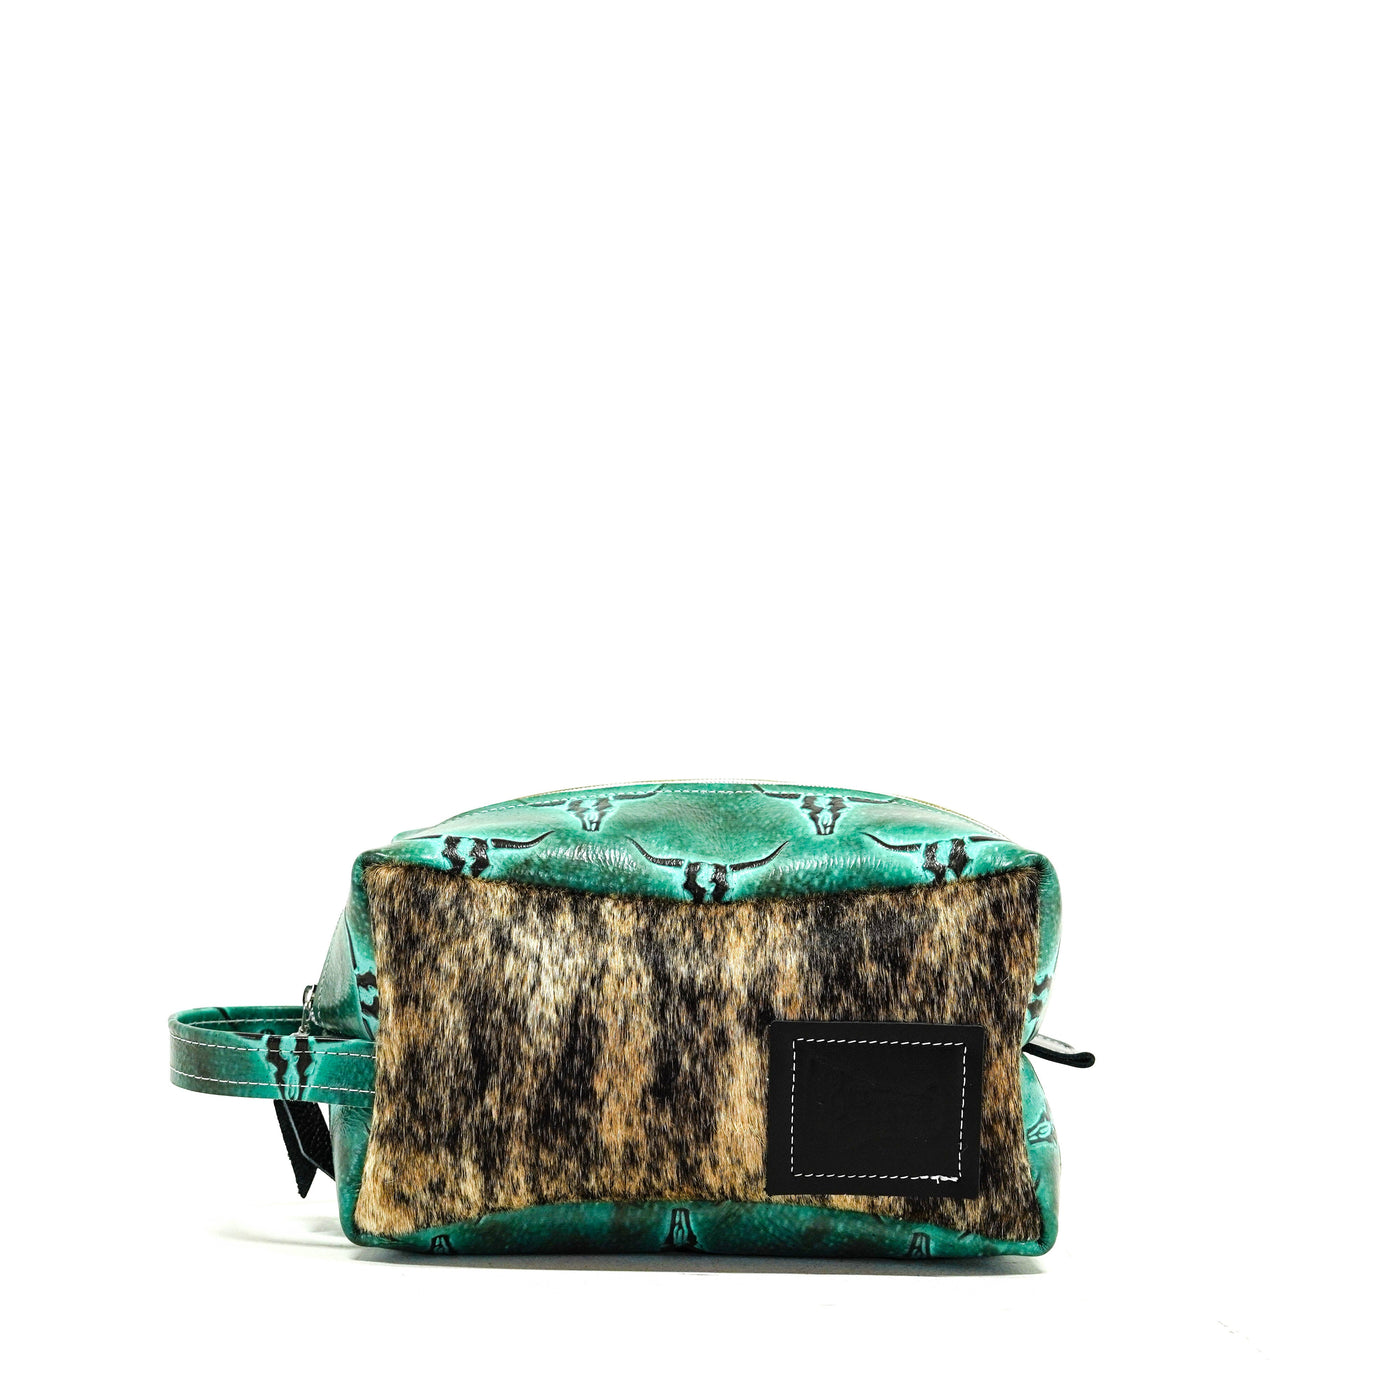 Dutton - Two-Tone Brindle w/ Royston Skulls-Dutton-Western-Cowhide-Bags-Handmade-Products-Gifts-Dancing Cactus Designs